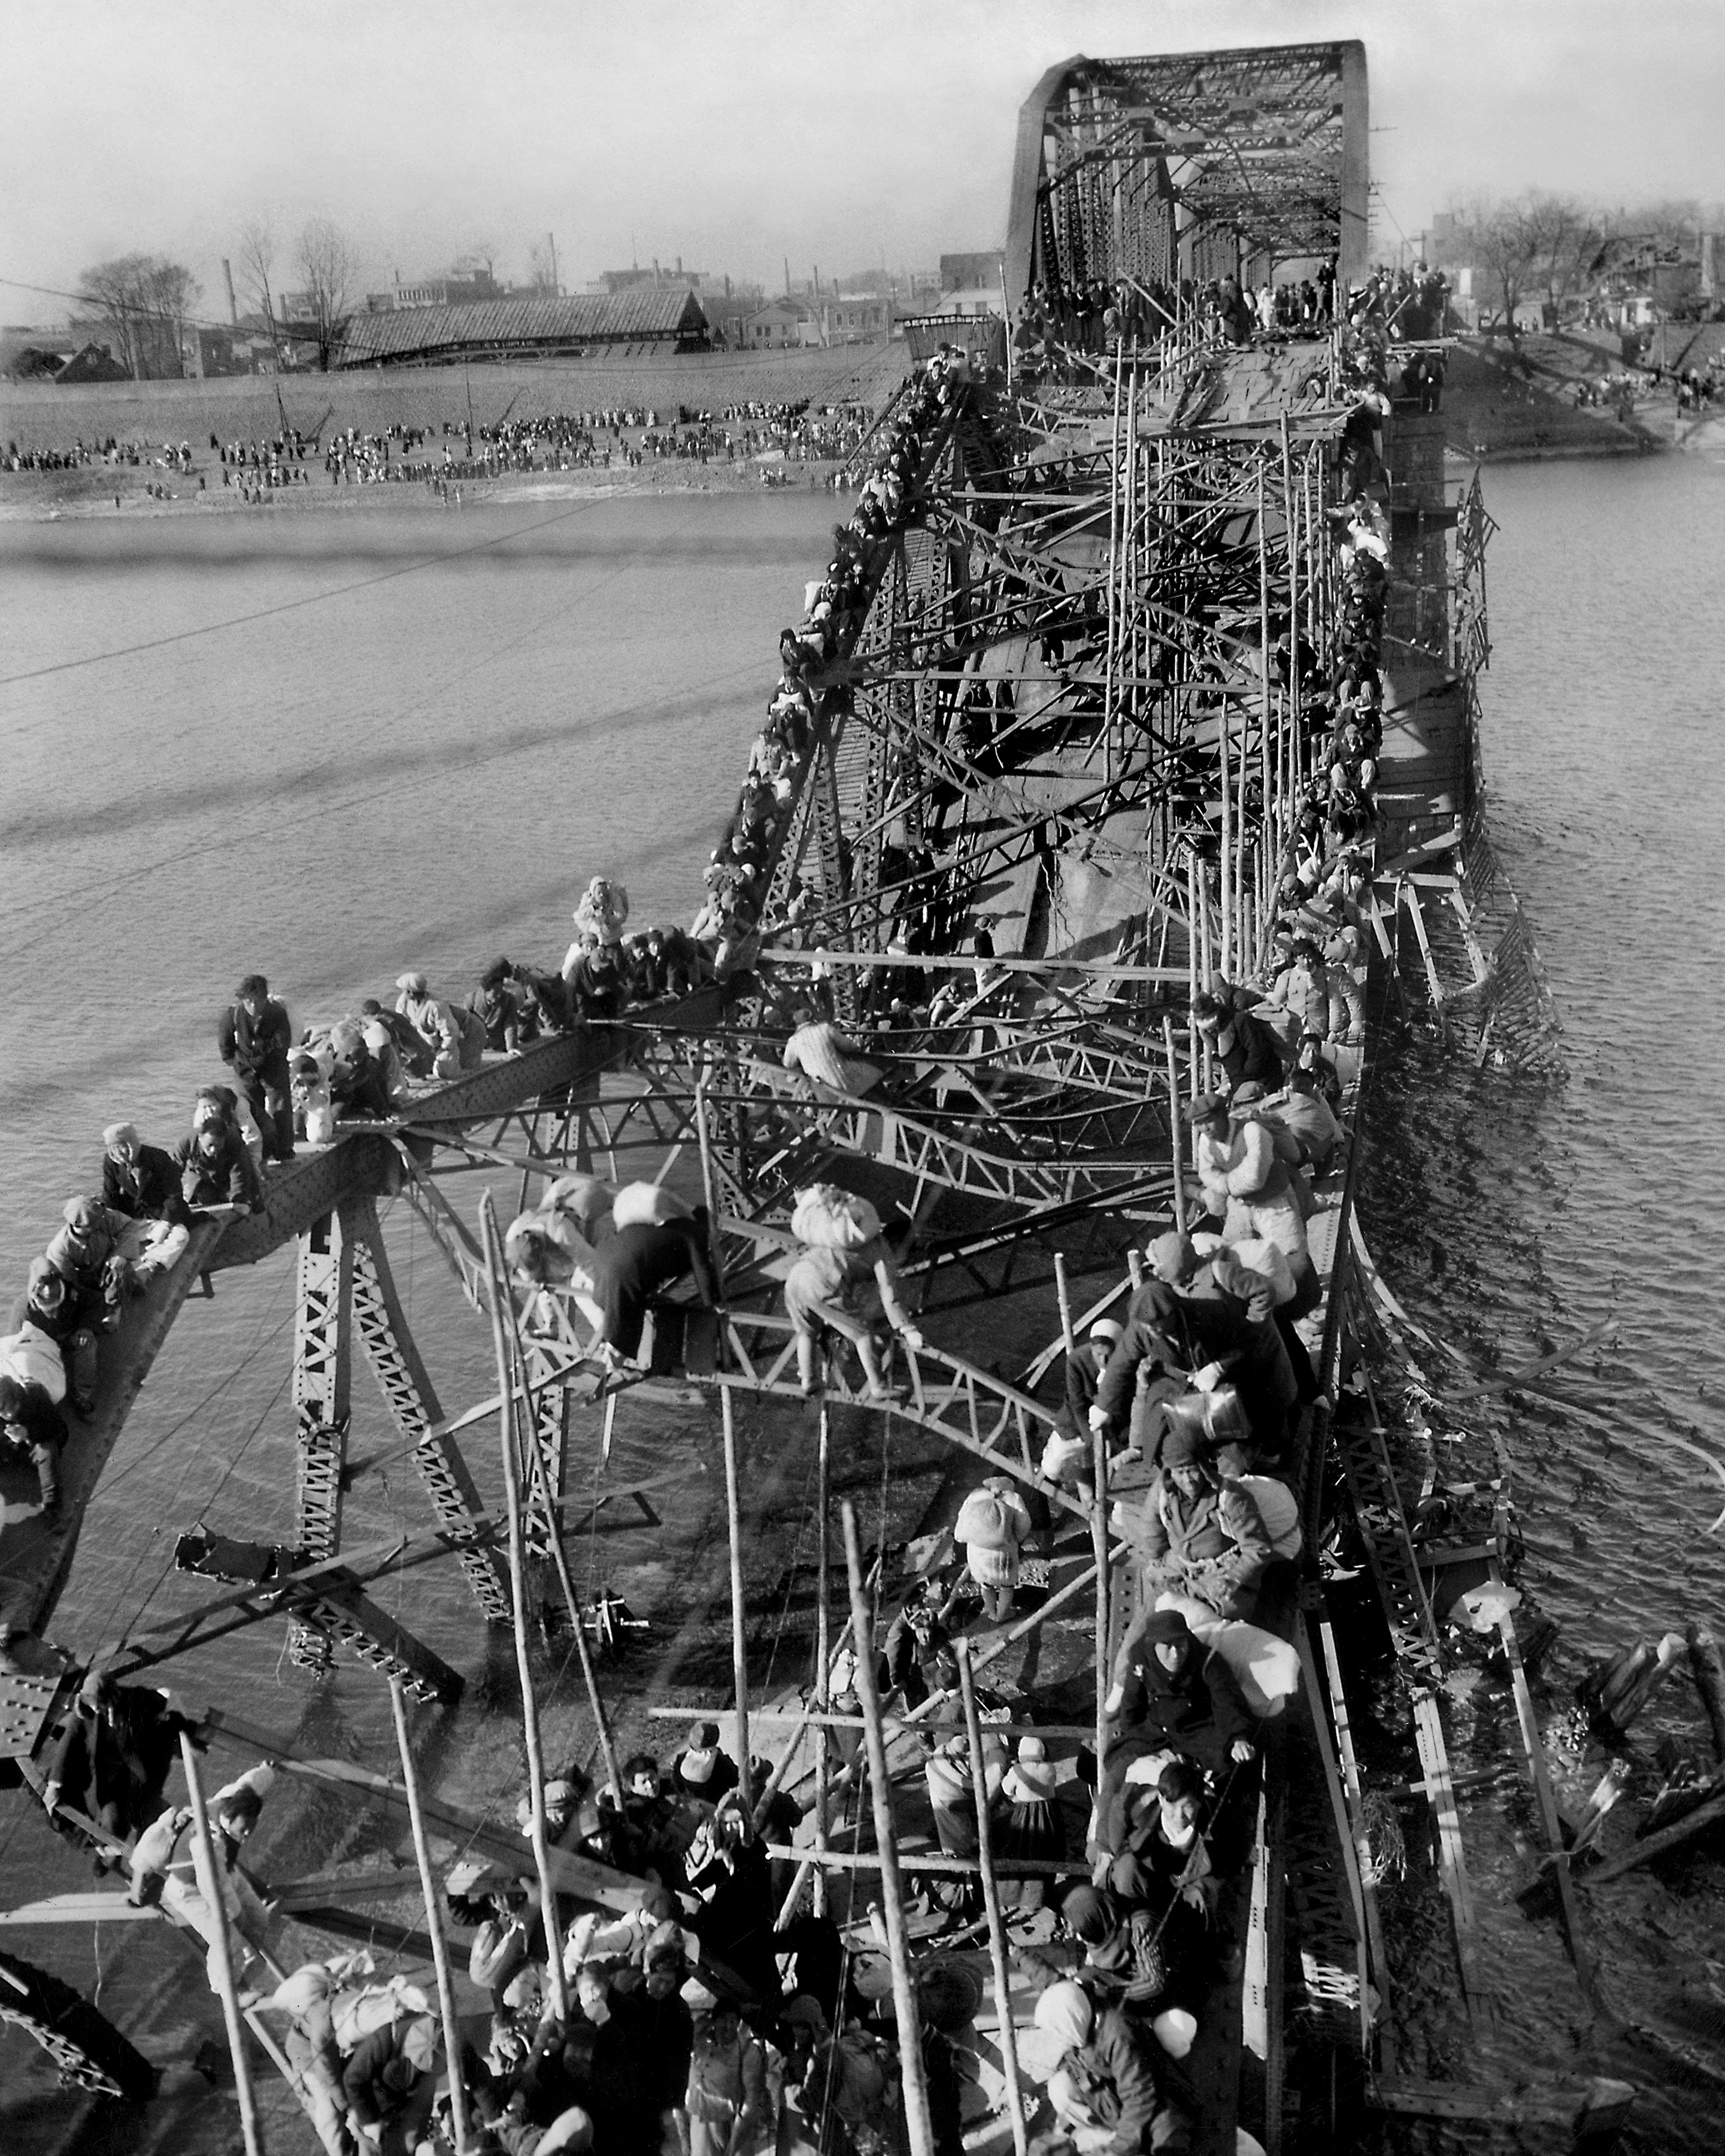 In bitter cold, residents from Pyongyang, North Korea, and refugees of other areas crawl over precarious, tangled girders of a bridge across the Taedong River on Dec. 4, 1950, as they flee south ahead of advancing Chinese Communist troops fighting on the side of North Korea. (AP Photo/Max Desfor)